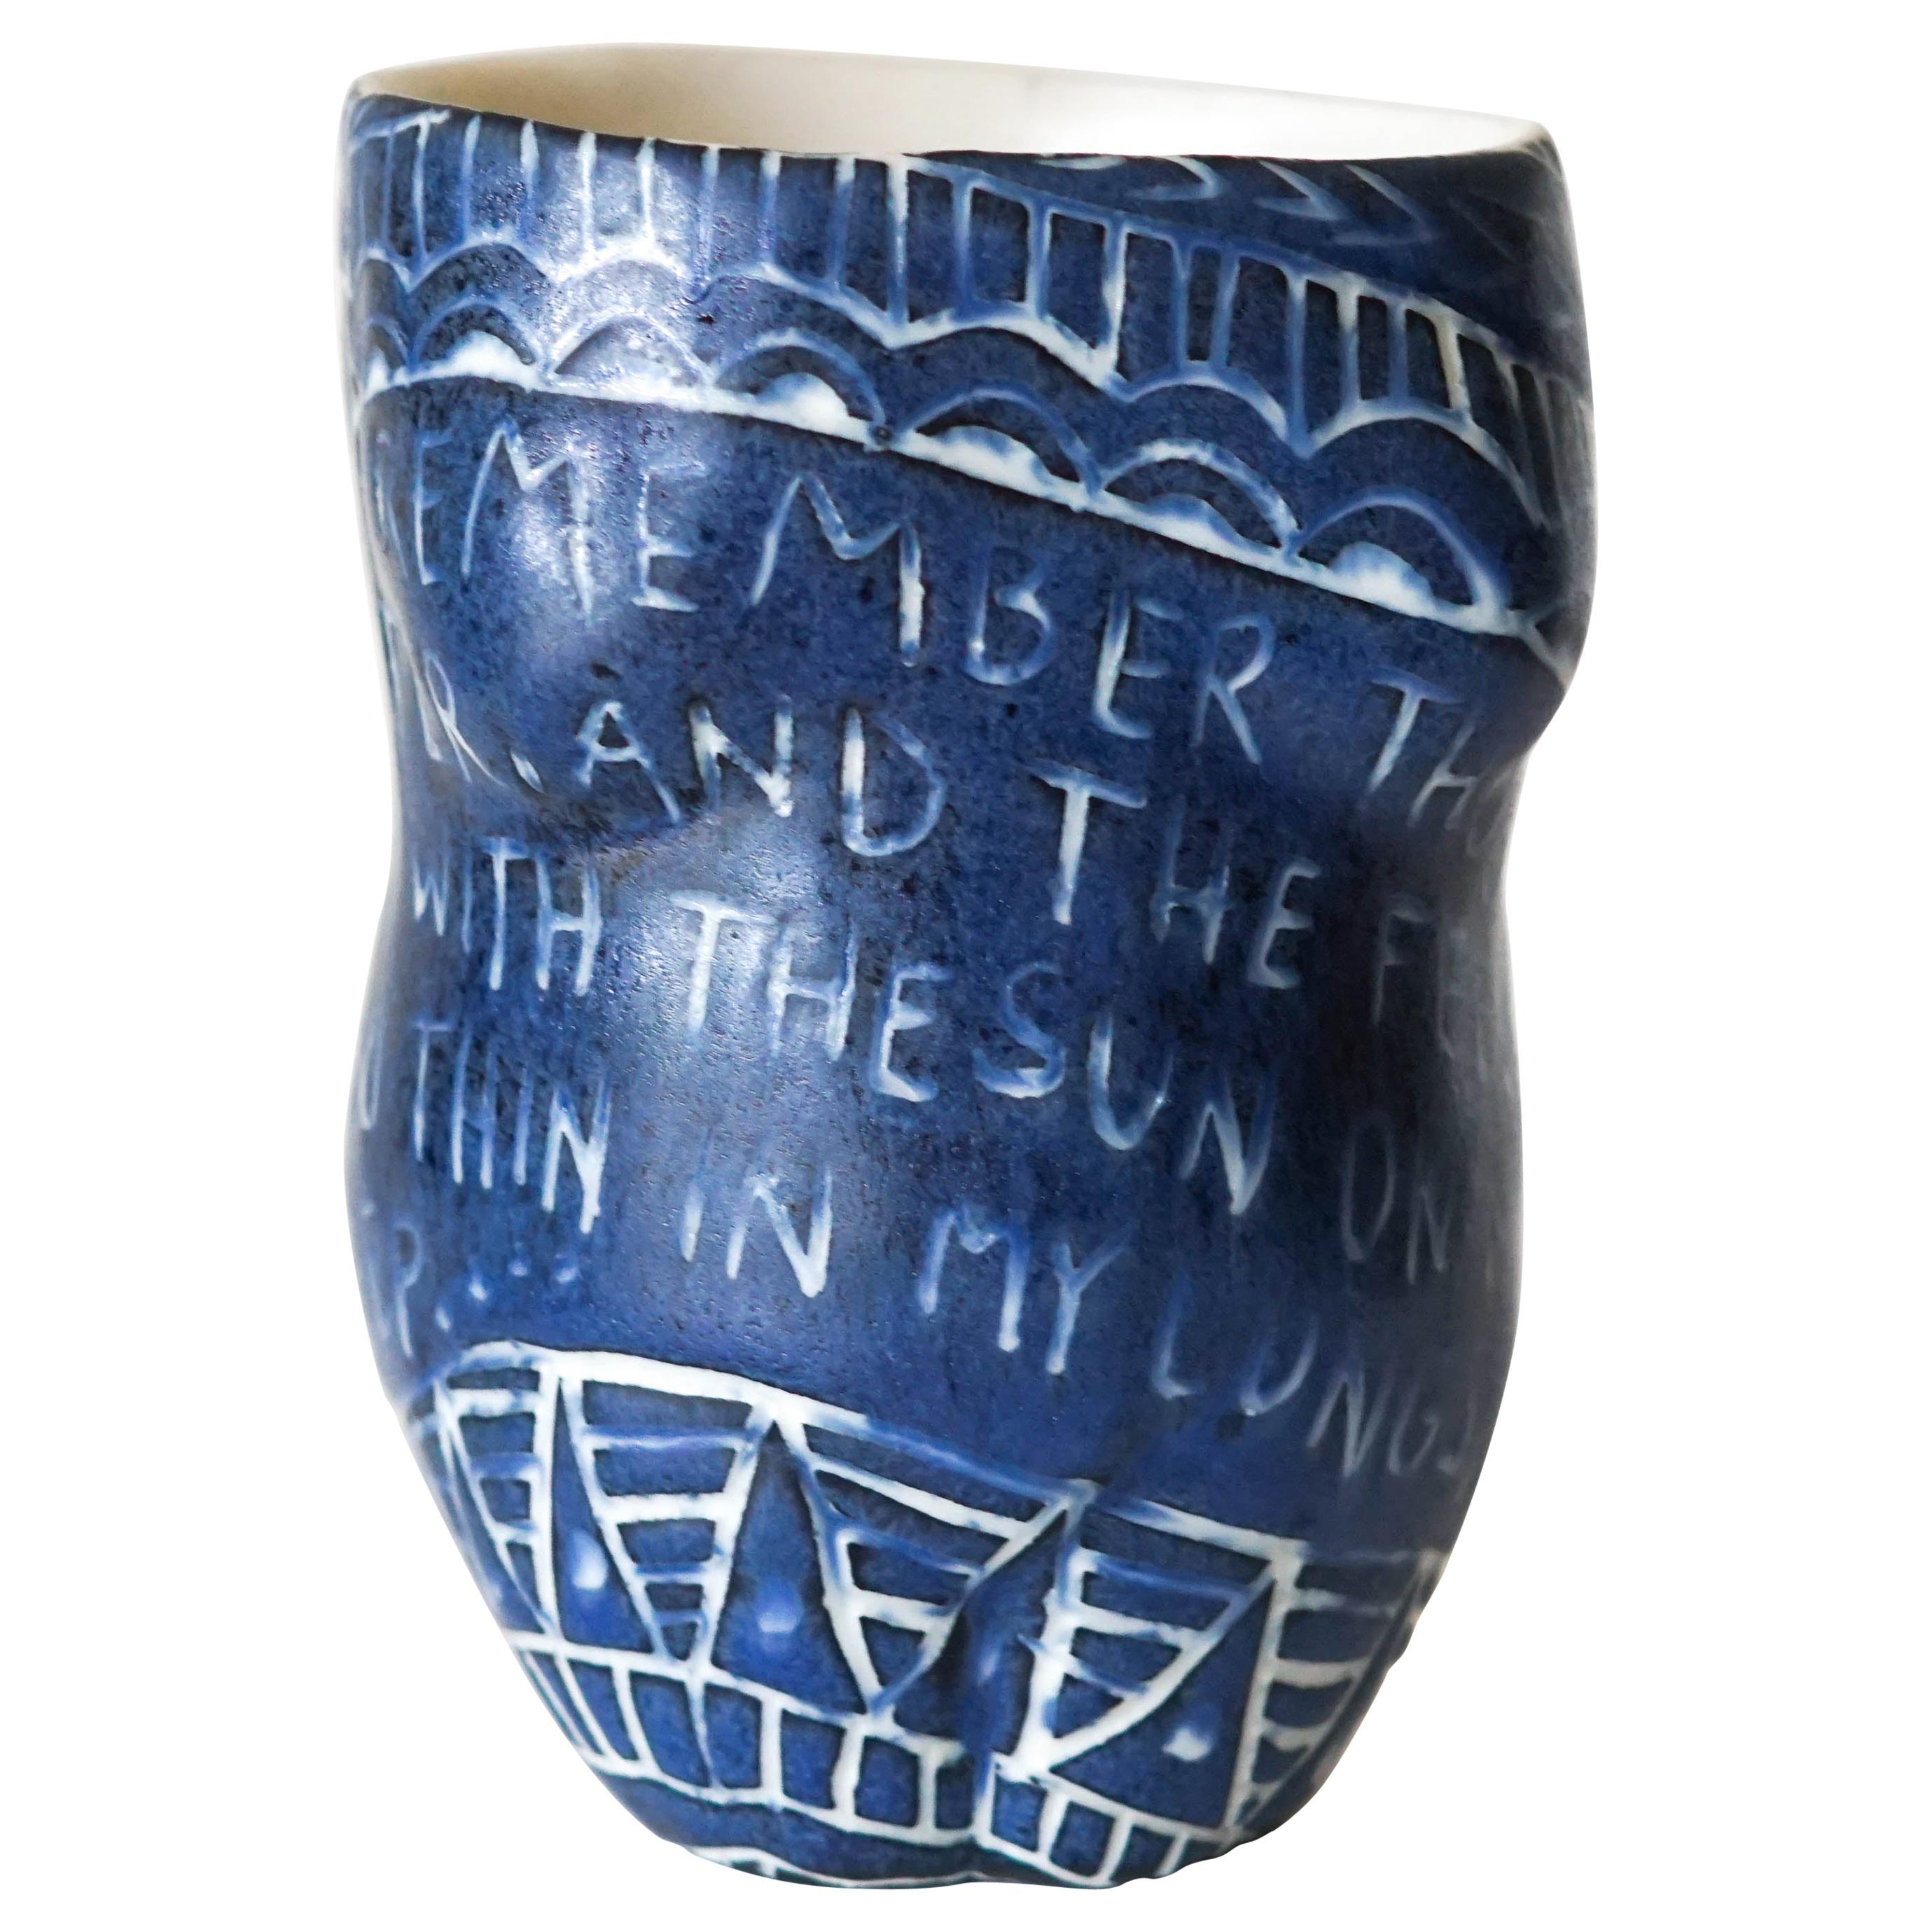 Alex Hodge Abstract Sculpture - “I remember those tree...” Porcelain  Cup with Sgraffito Detailing by the artist